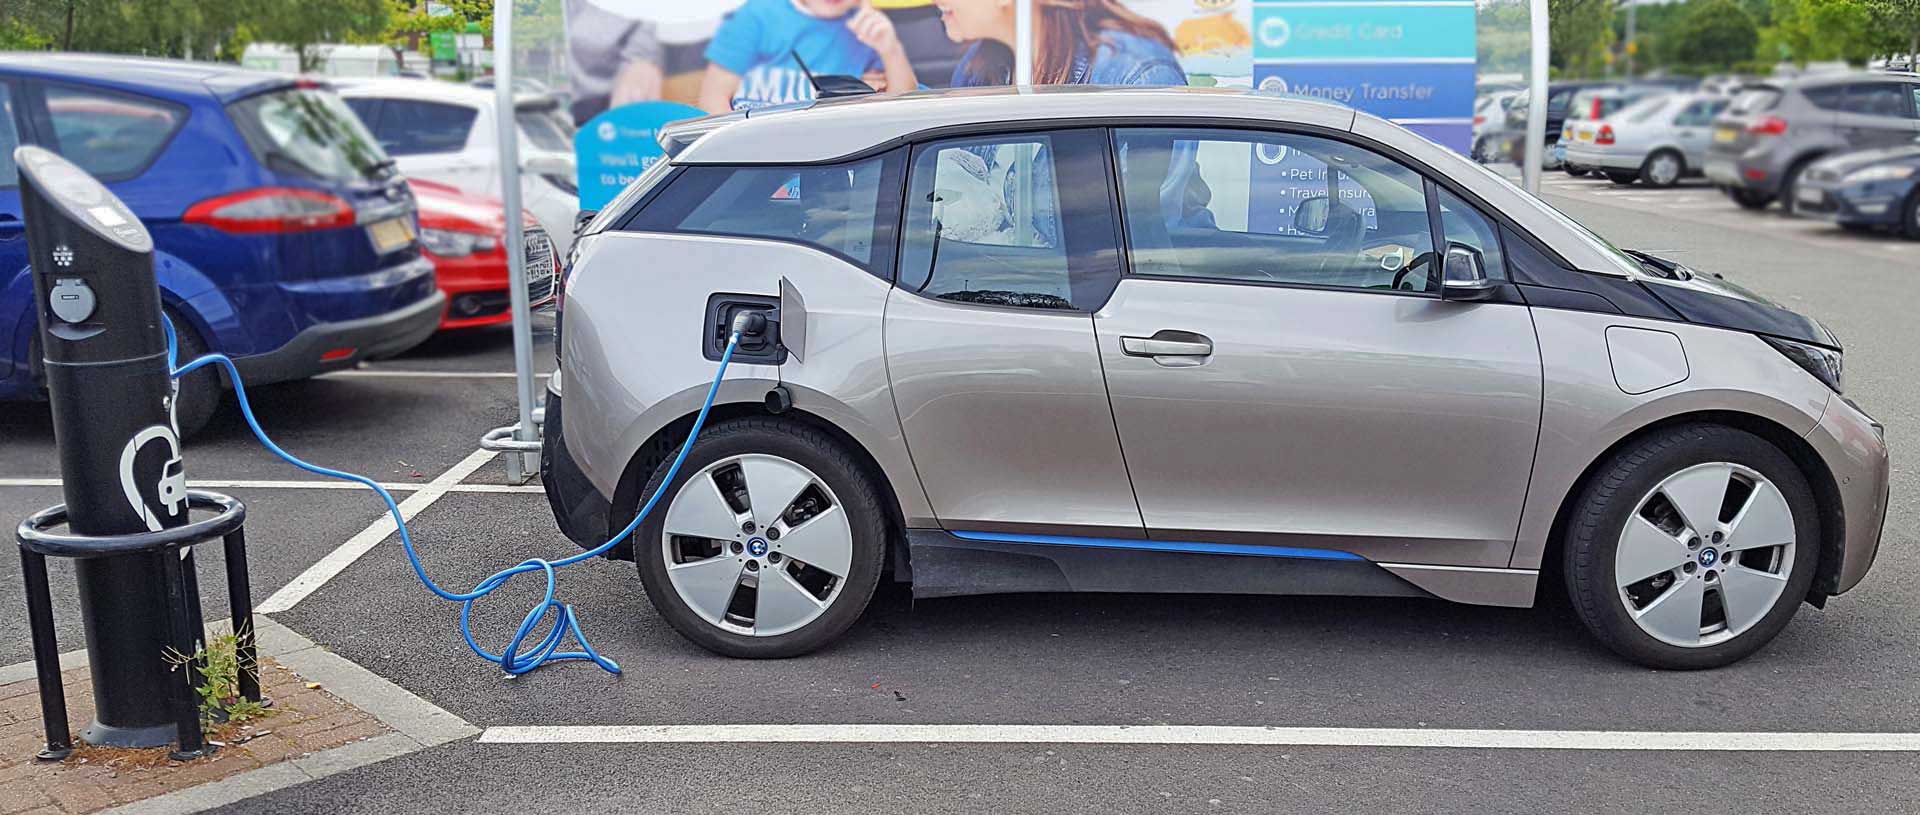 £4.5m funding boost for London's electric vehicle charging points